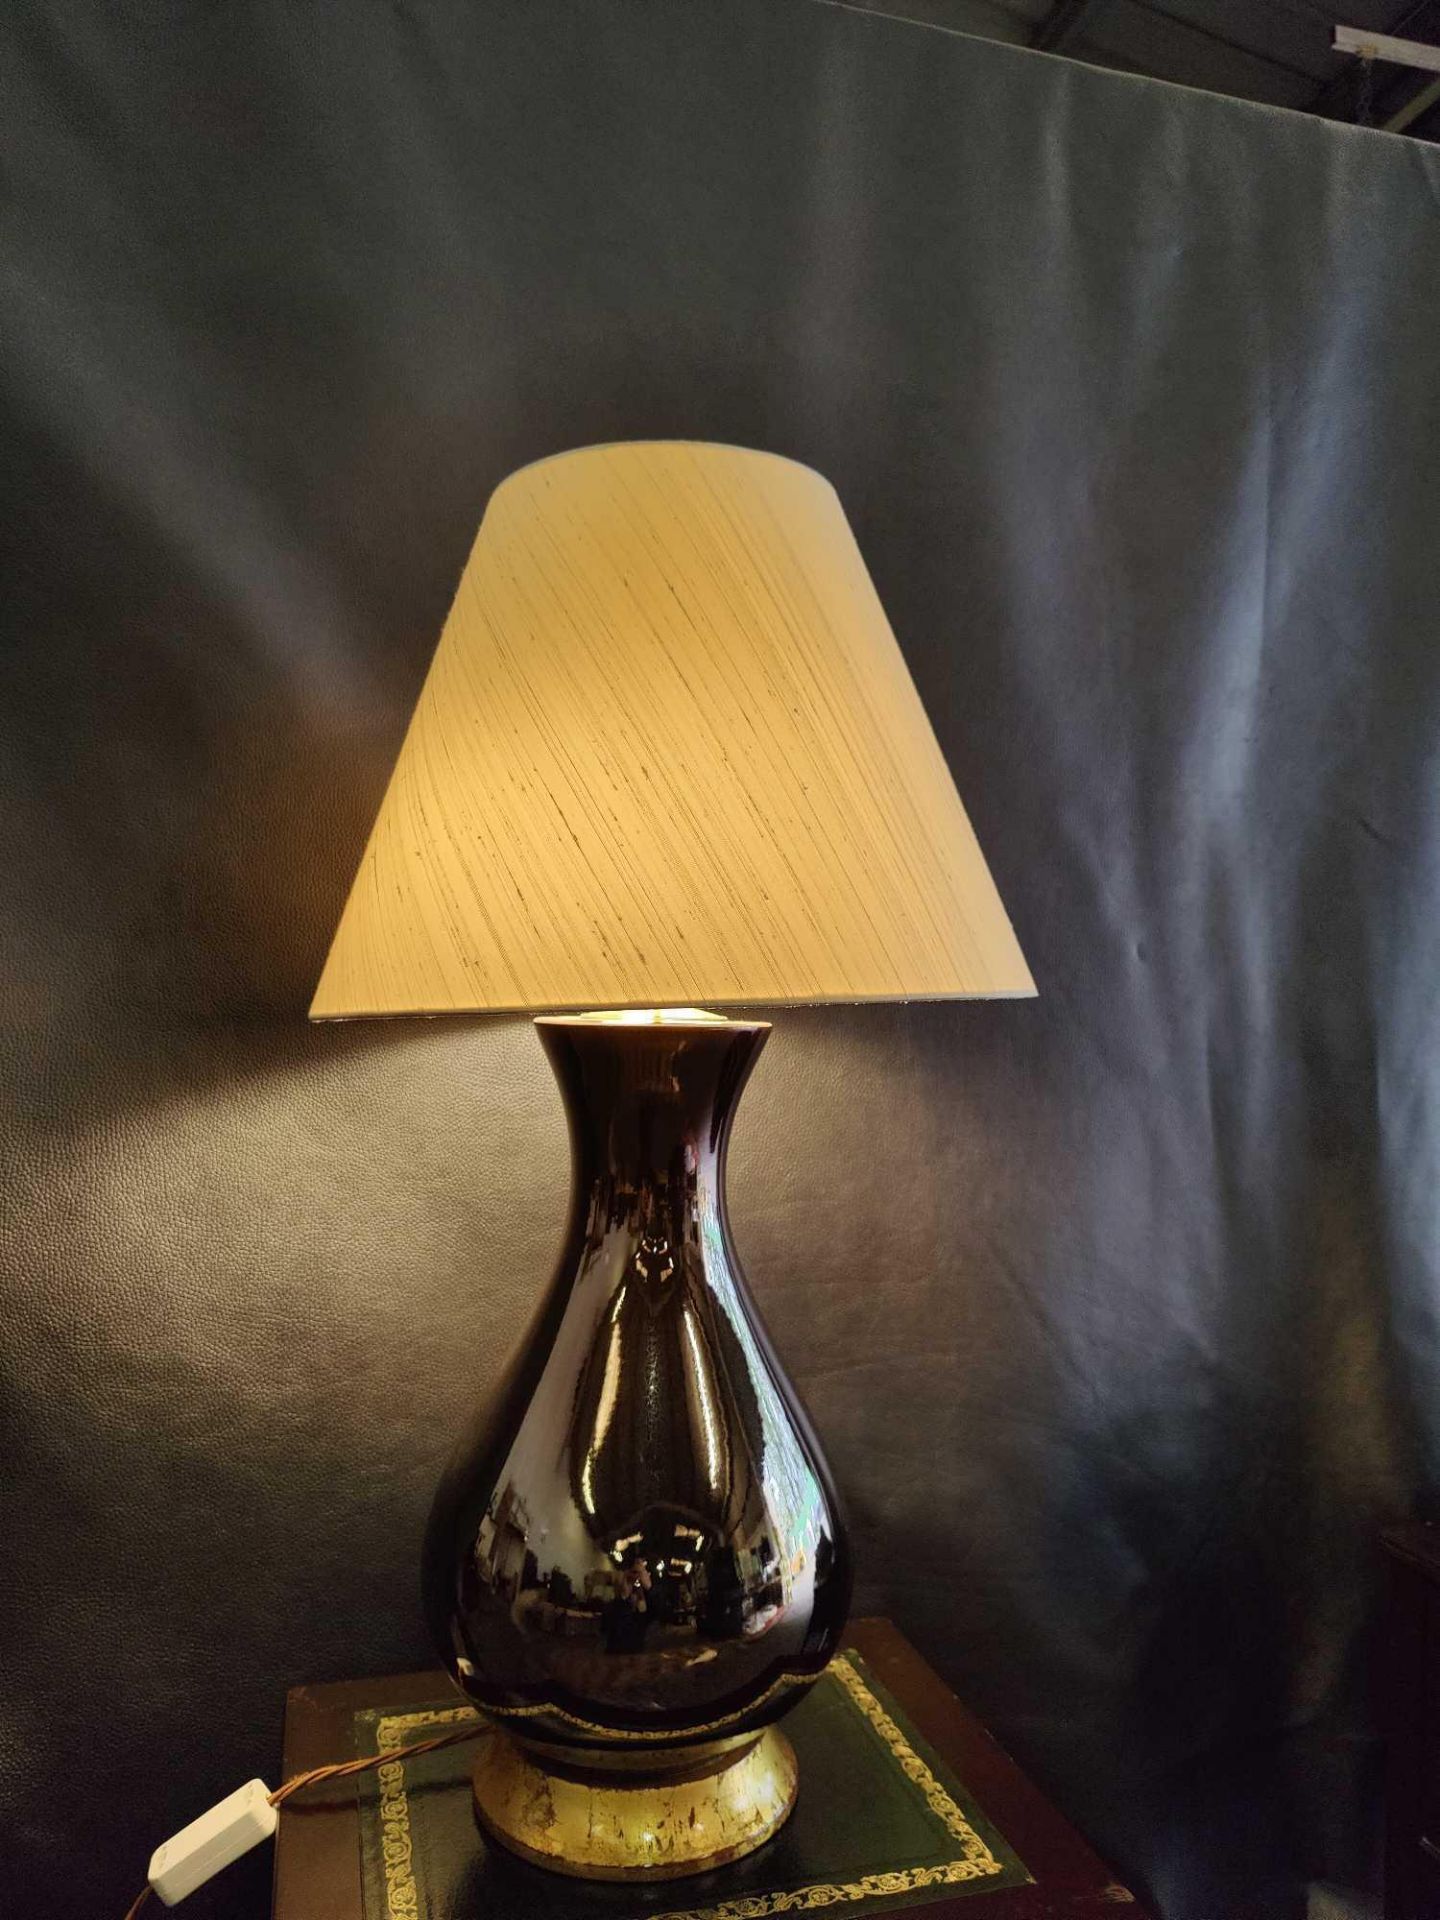 2 x Heathfield And Co Louisa Glazed Ceramic Table Lamp With Textured Shade 77cm - Image 5 of 8